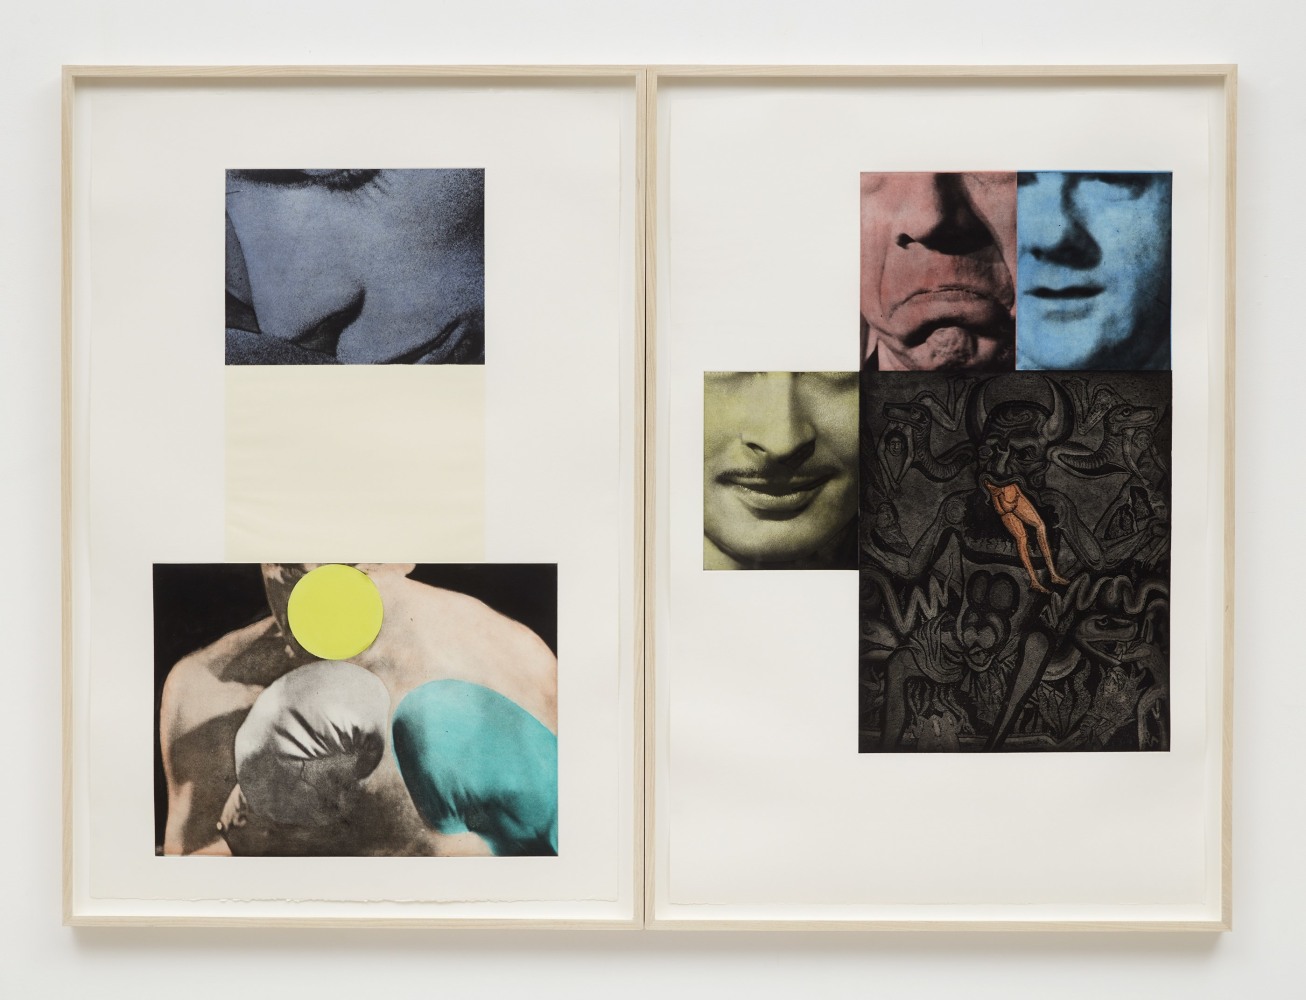 John Baldessari&amp;nbsp;
Heaven and Hell, 1988&amp;nbsp;
2 aquatint, scraping, roulette, and photo-etchings on Rives BFK paper
47 1/4 x 31 1/2 inches (120 x 80 cm), each&amp;nbsp;
Edition of 45 + proofs&amp;nbsp;
Printed by Peter Kneub&amp;uuml;hler, Zurich&amp;nbsp;
Published by Peter Blum Edition, New York&amp;nbsp;